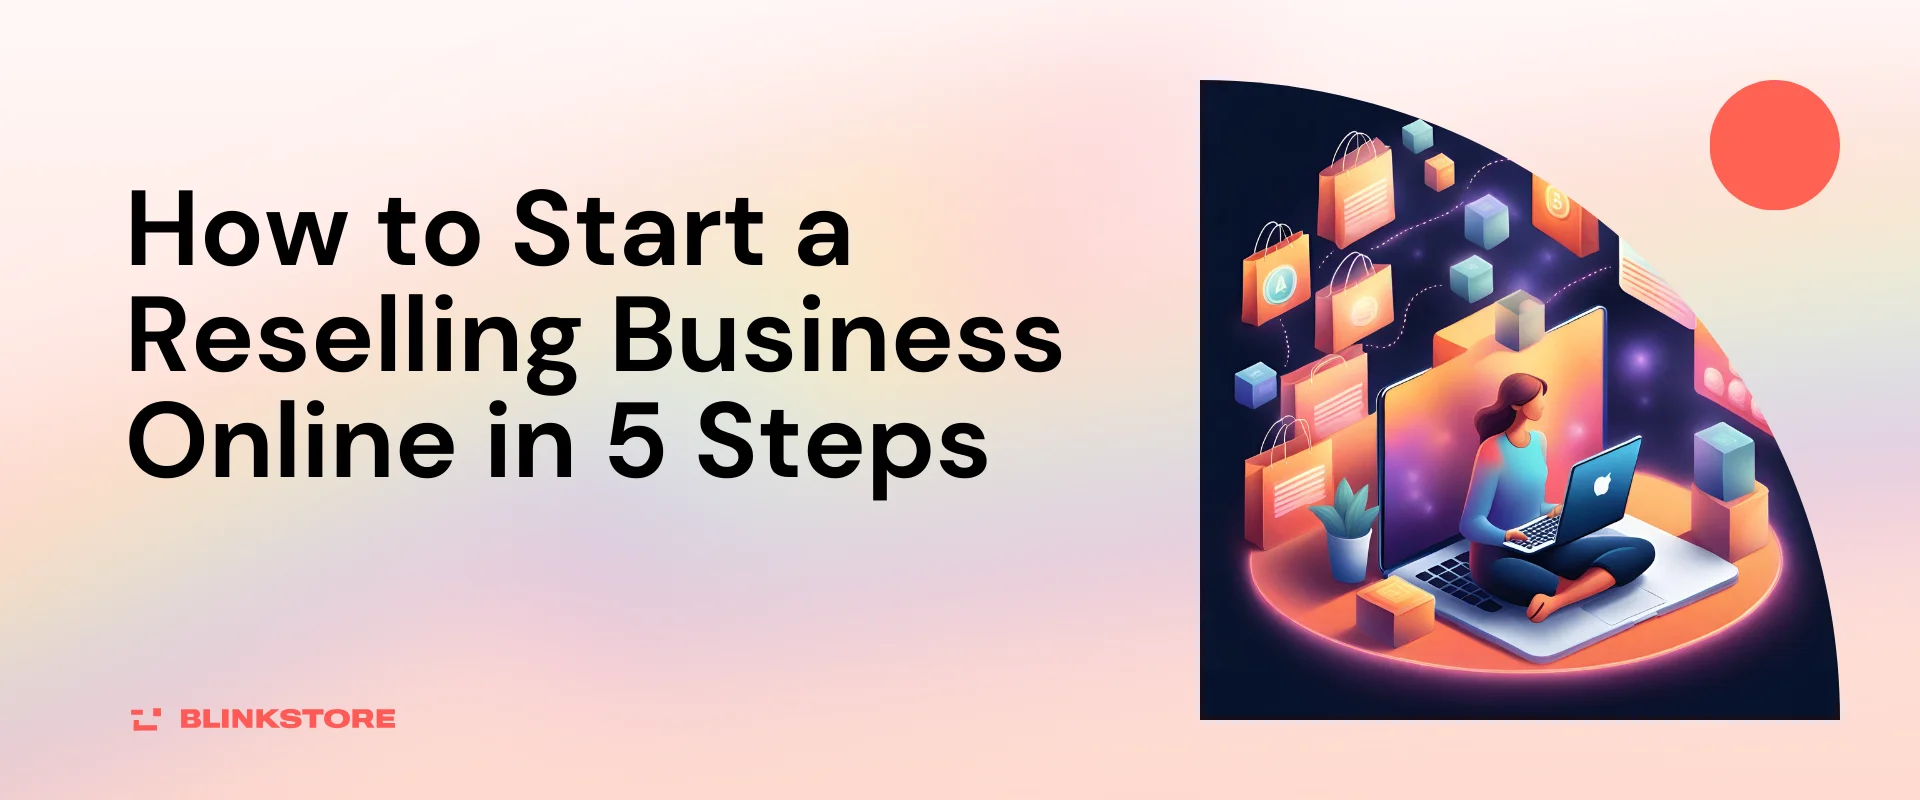 How to Start a Reselling Business Online Step-by-Step Guide